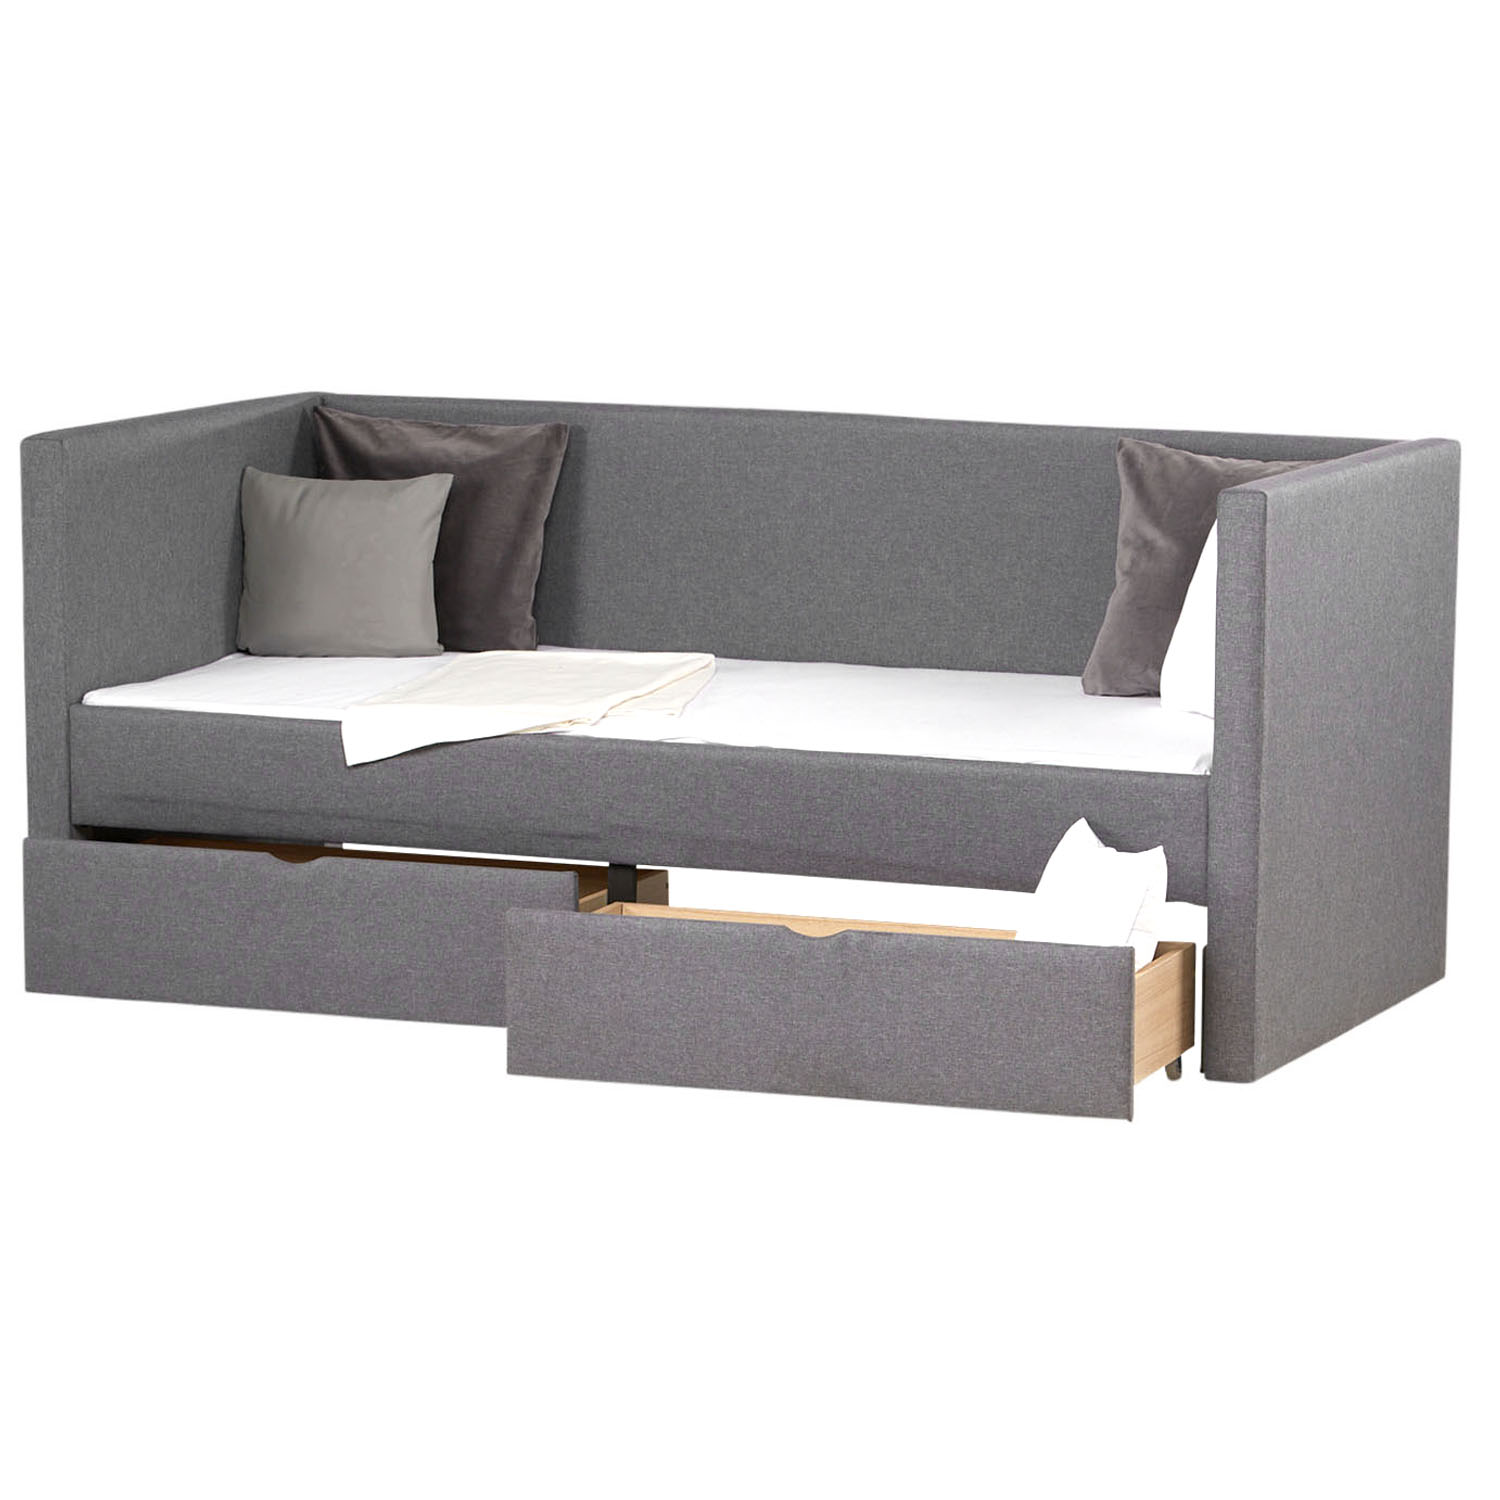 Upholstered Bed 90x200 Grey Bed Drawer Day Bed Sofa Bed Guest Bed Extendable